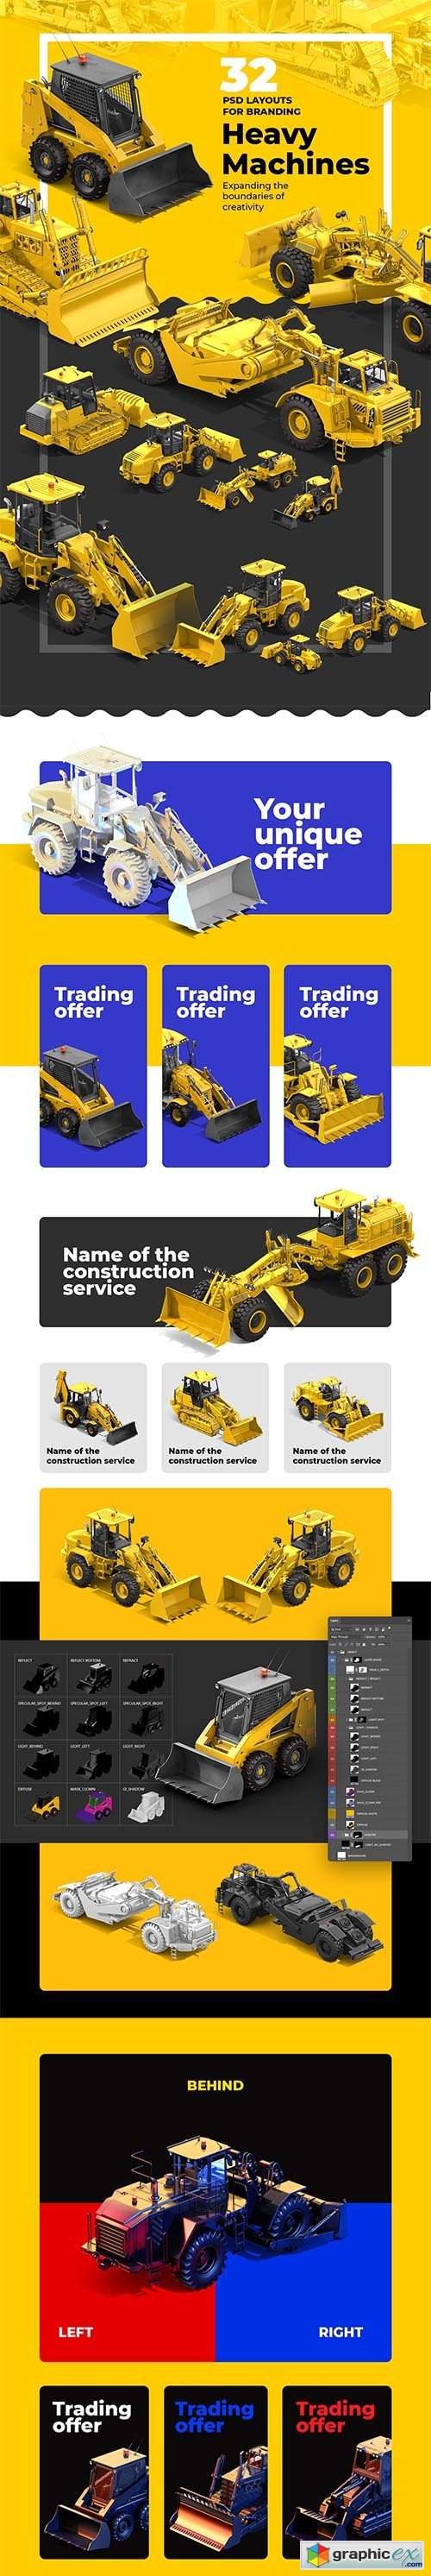 Download PSD Heavy Machines Mockup 360 PRO #02 » Free Download Vector Stock Image Photoshop Icon